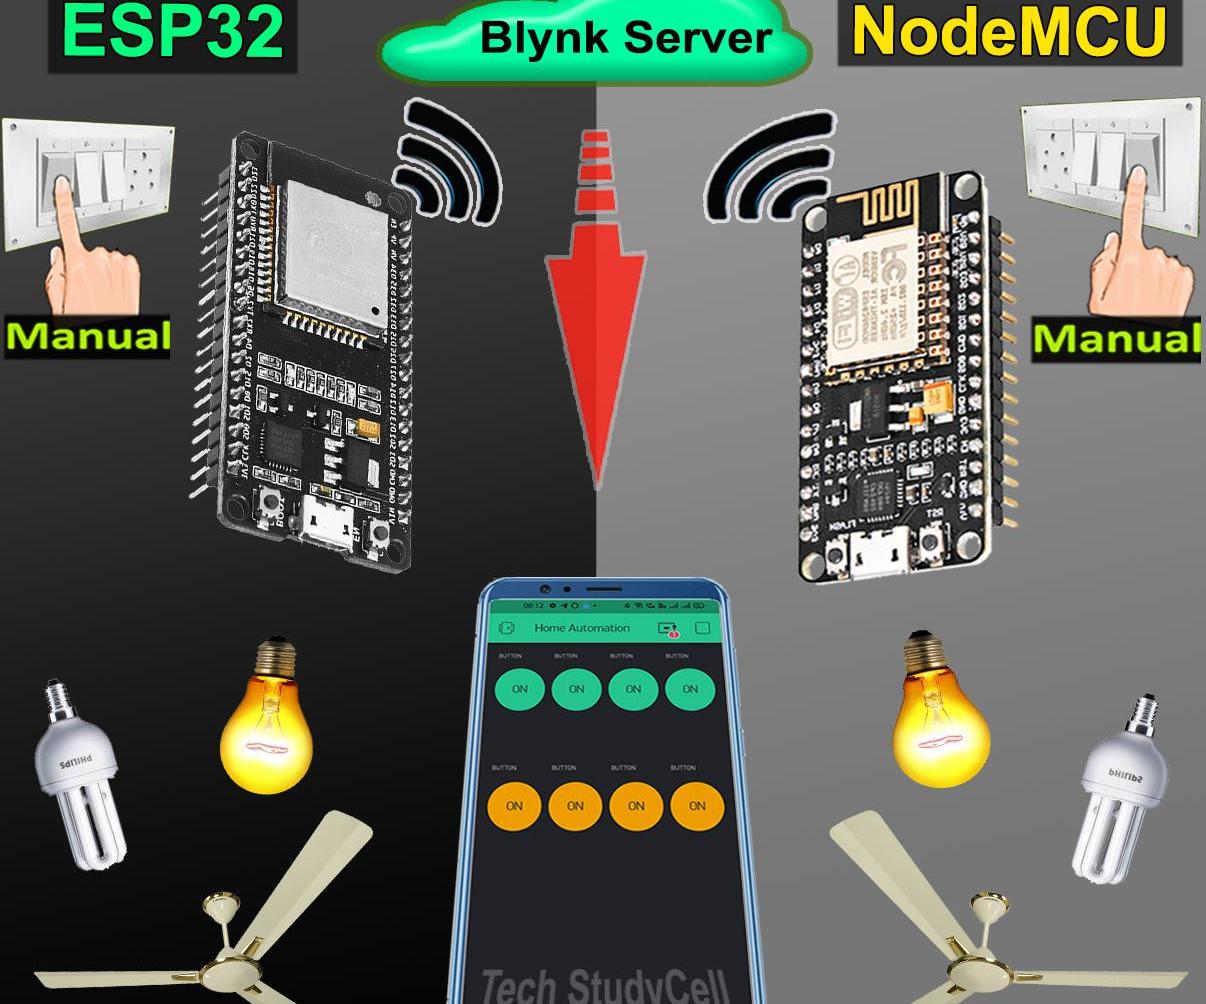 Blynk Home Automation With Multiple ESP32 NodeMCU IoT Projects 2021